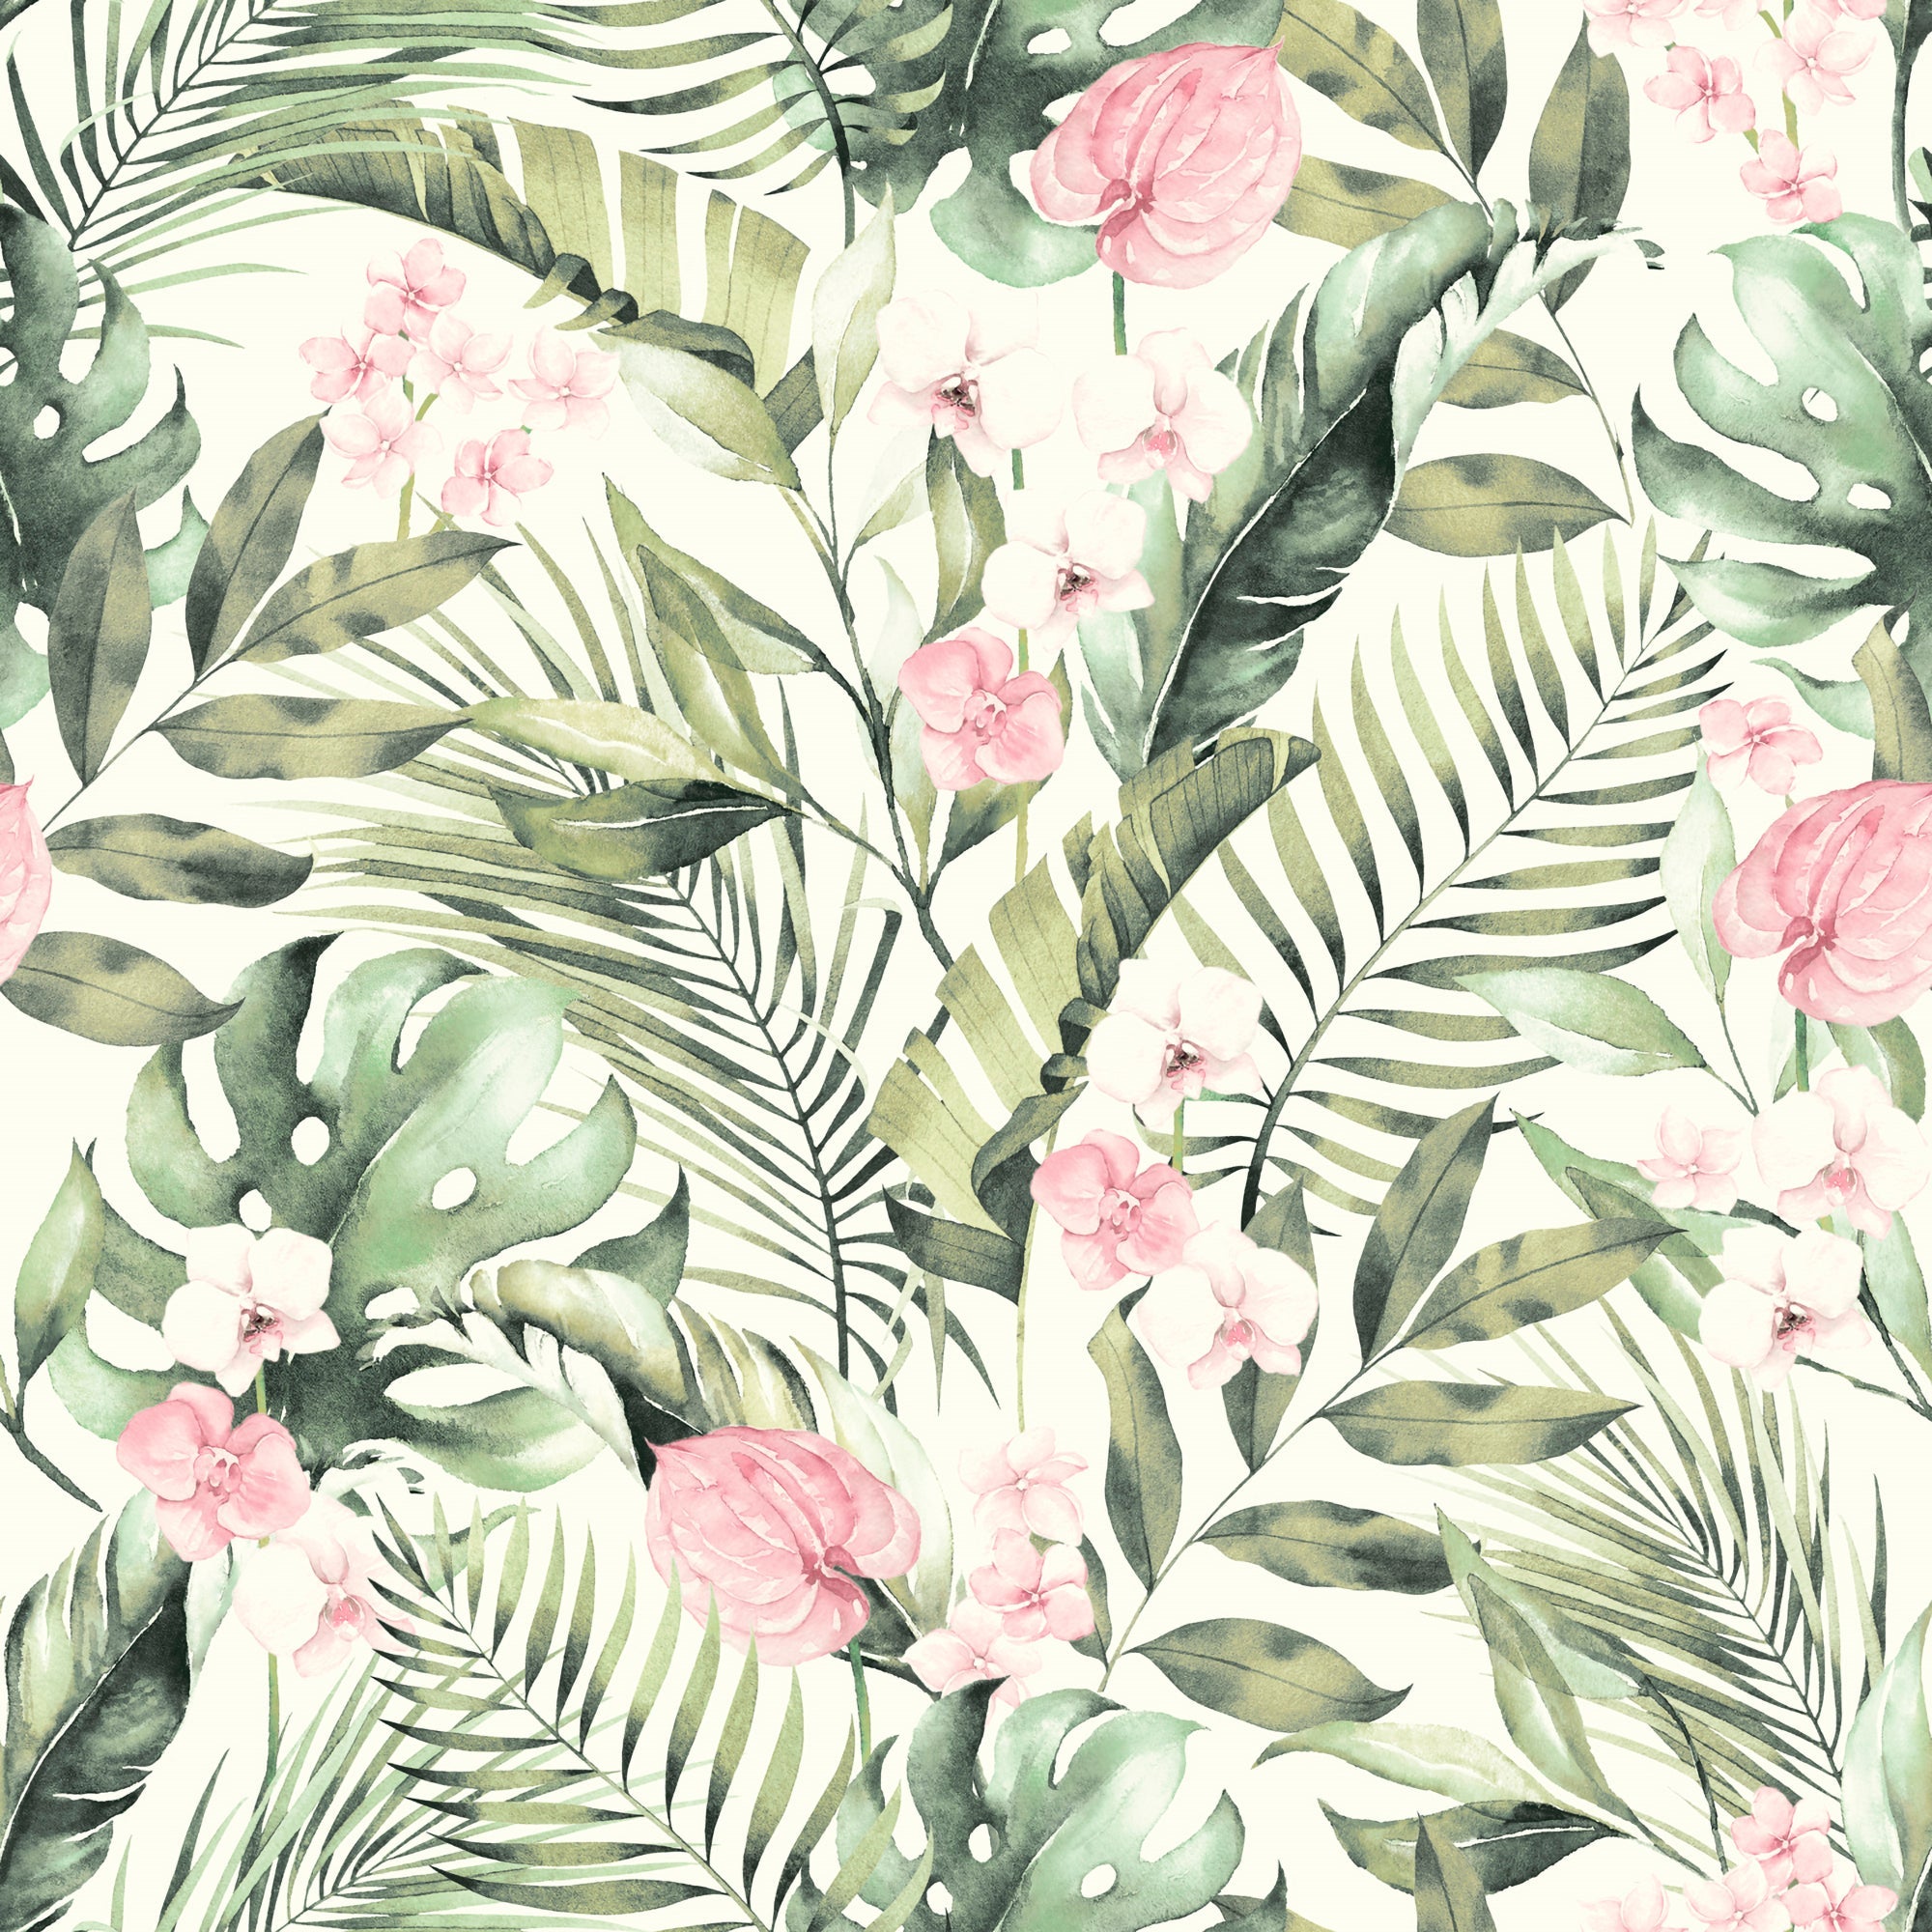 Tropical Floral Pink & Green sw12 by Arthouse